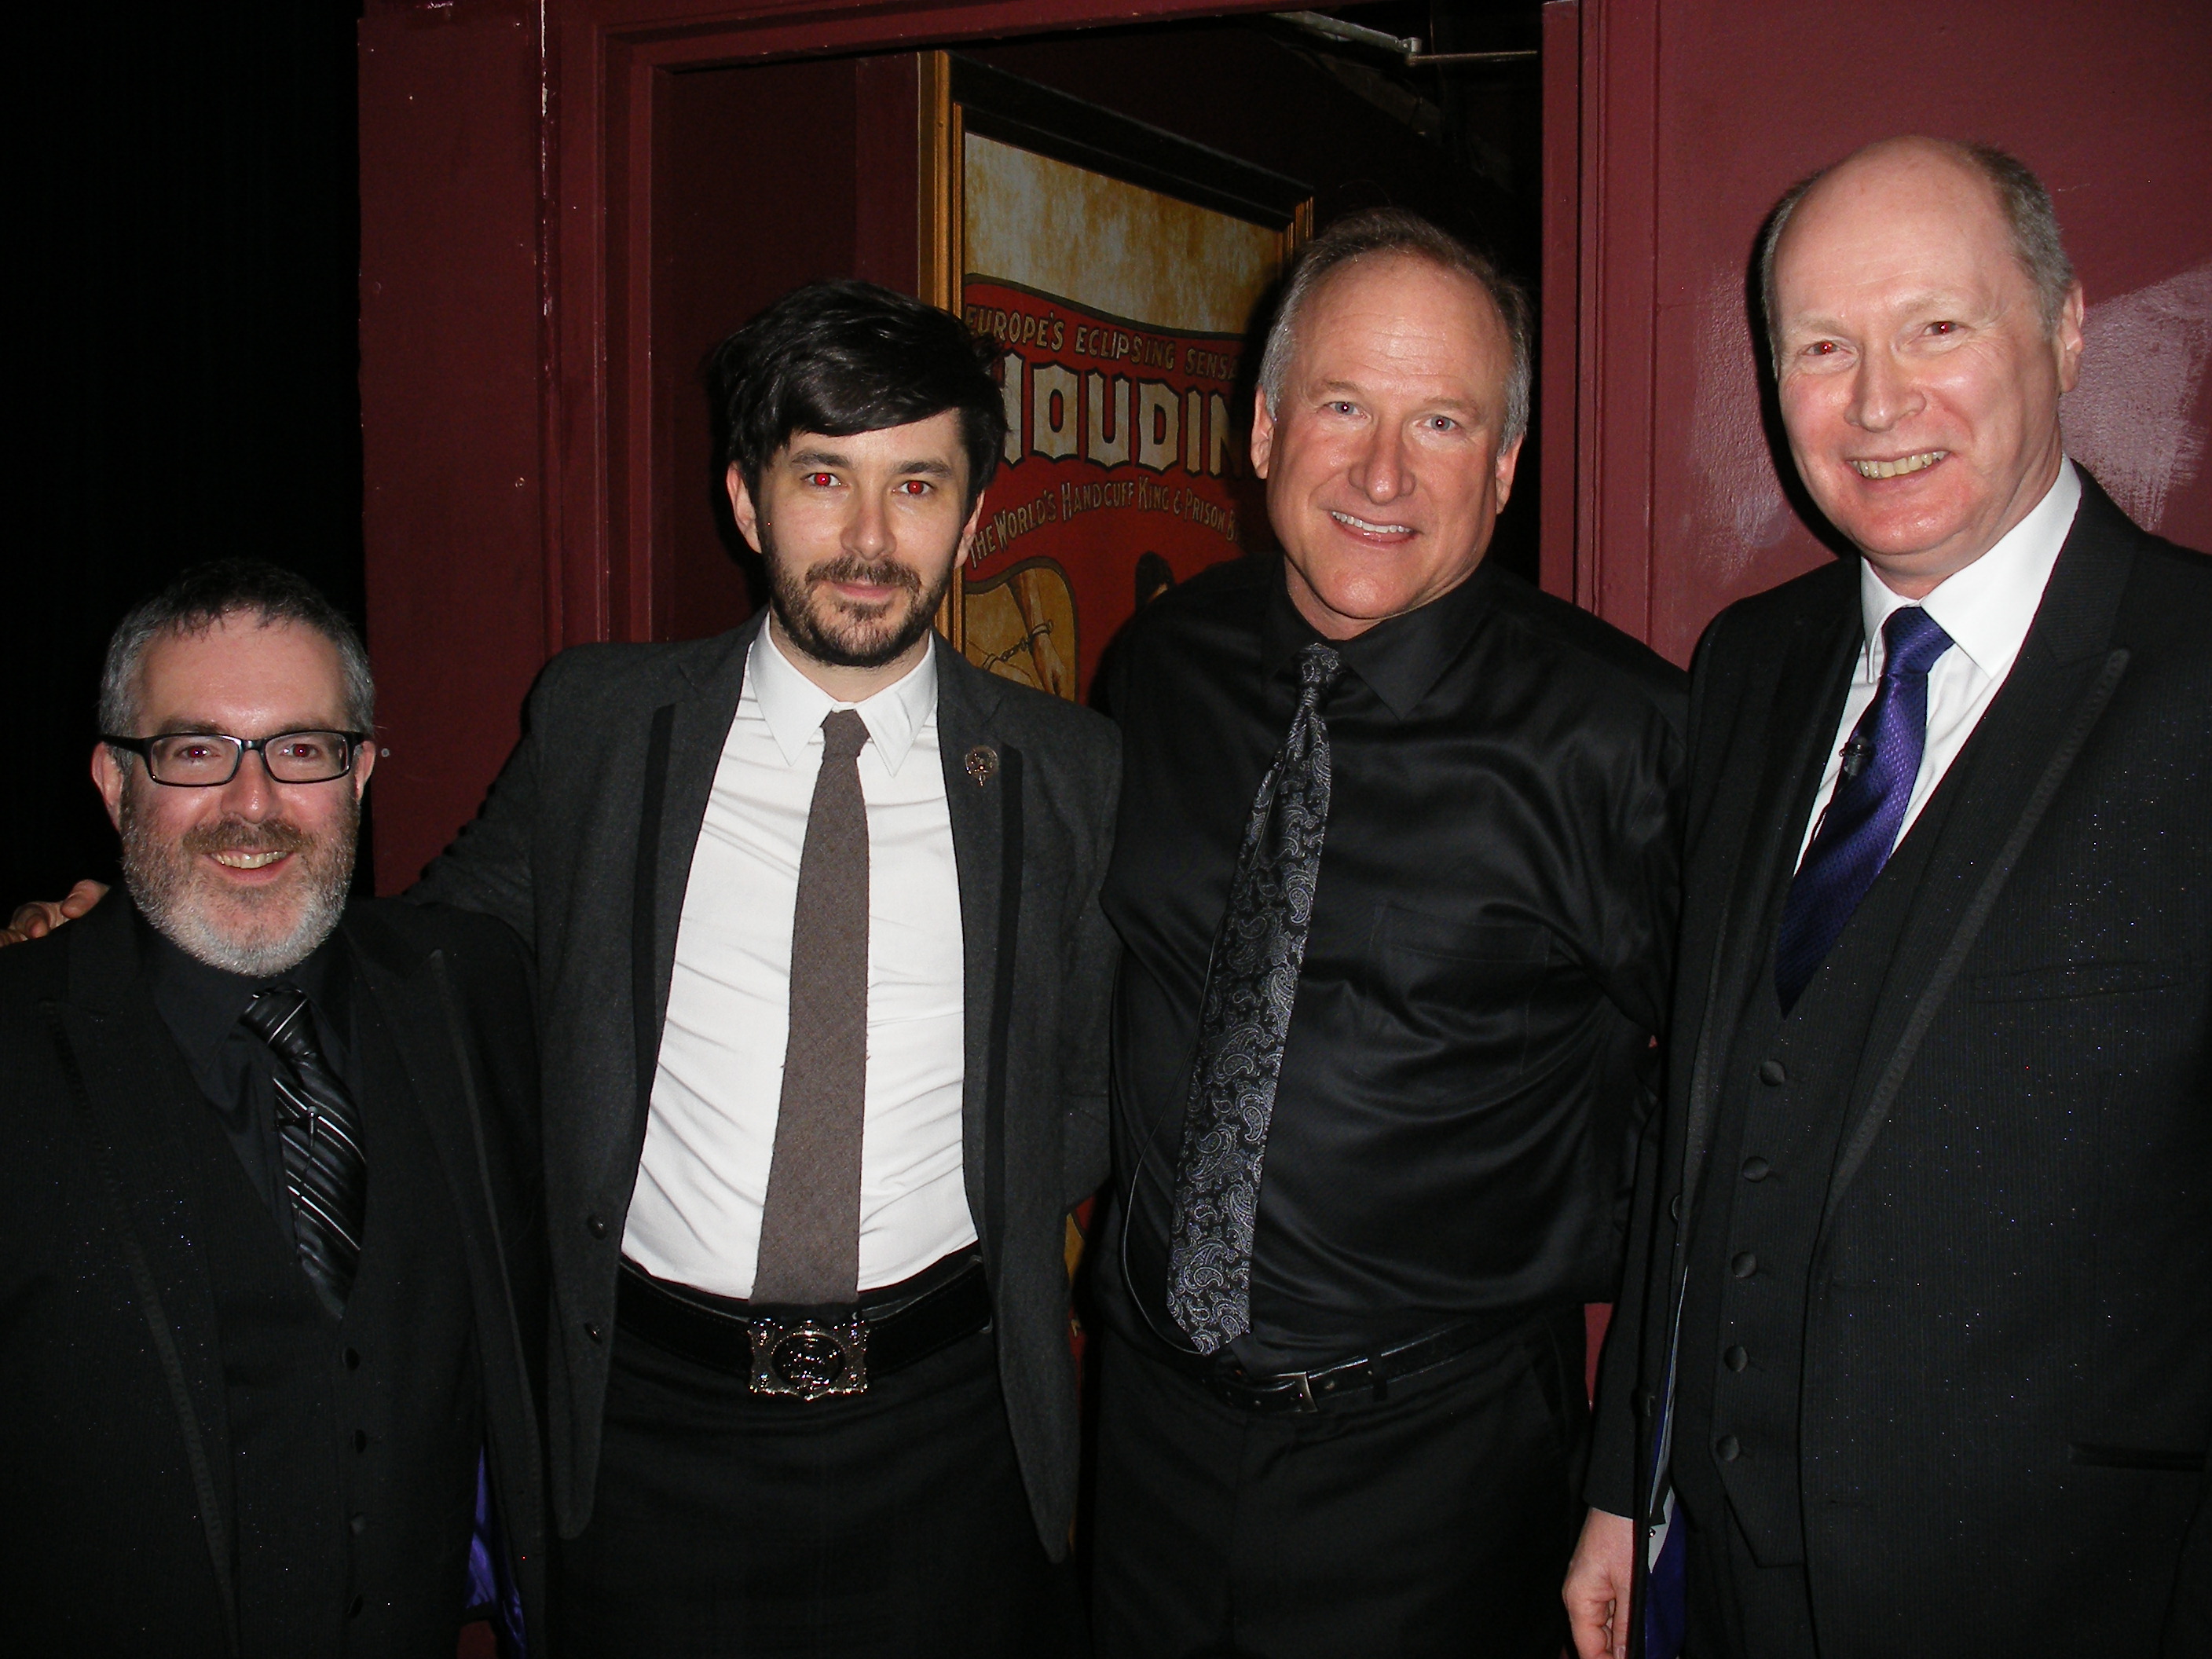 Backstage at The Magic Castle with Stuart McLeod and Scott Land